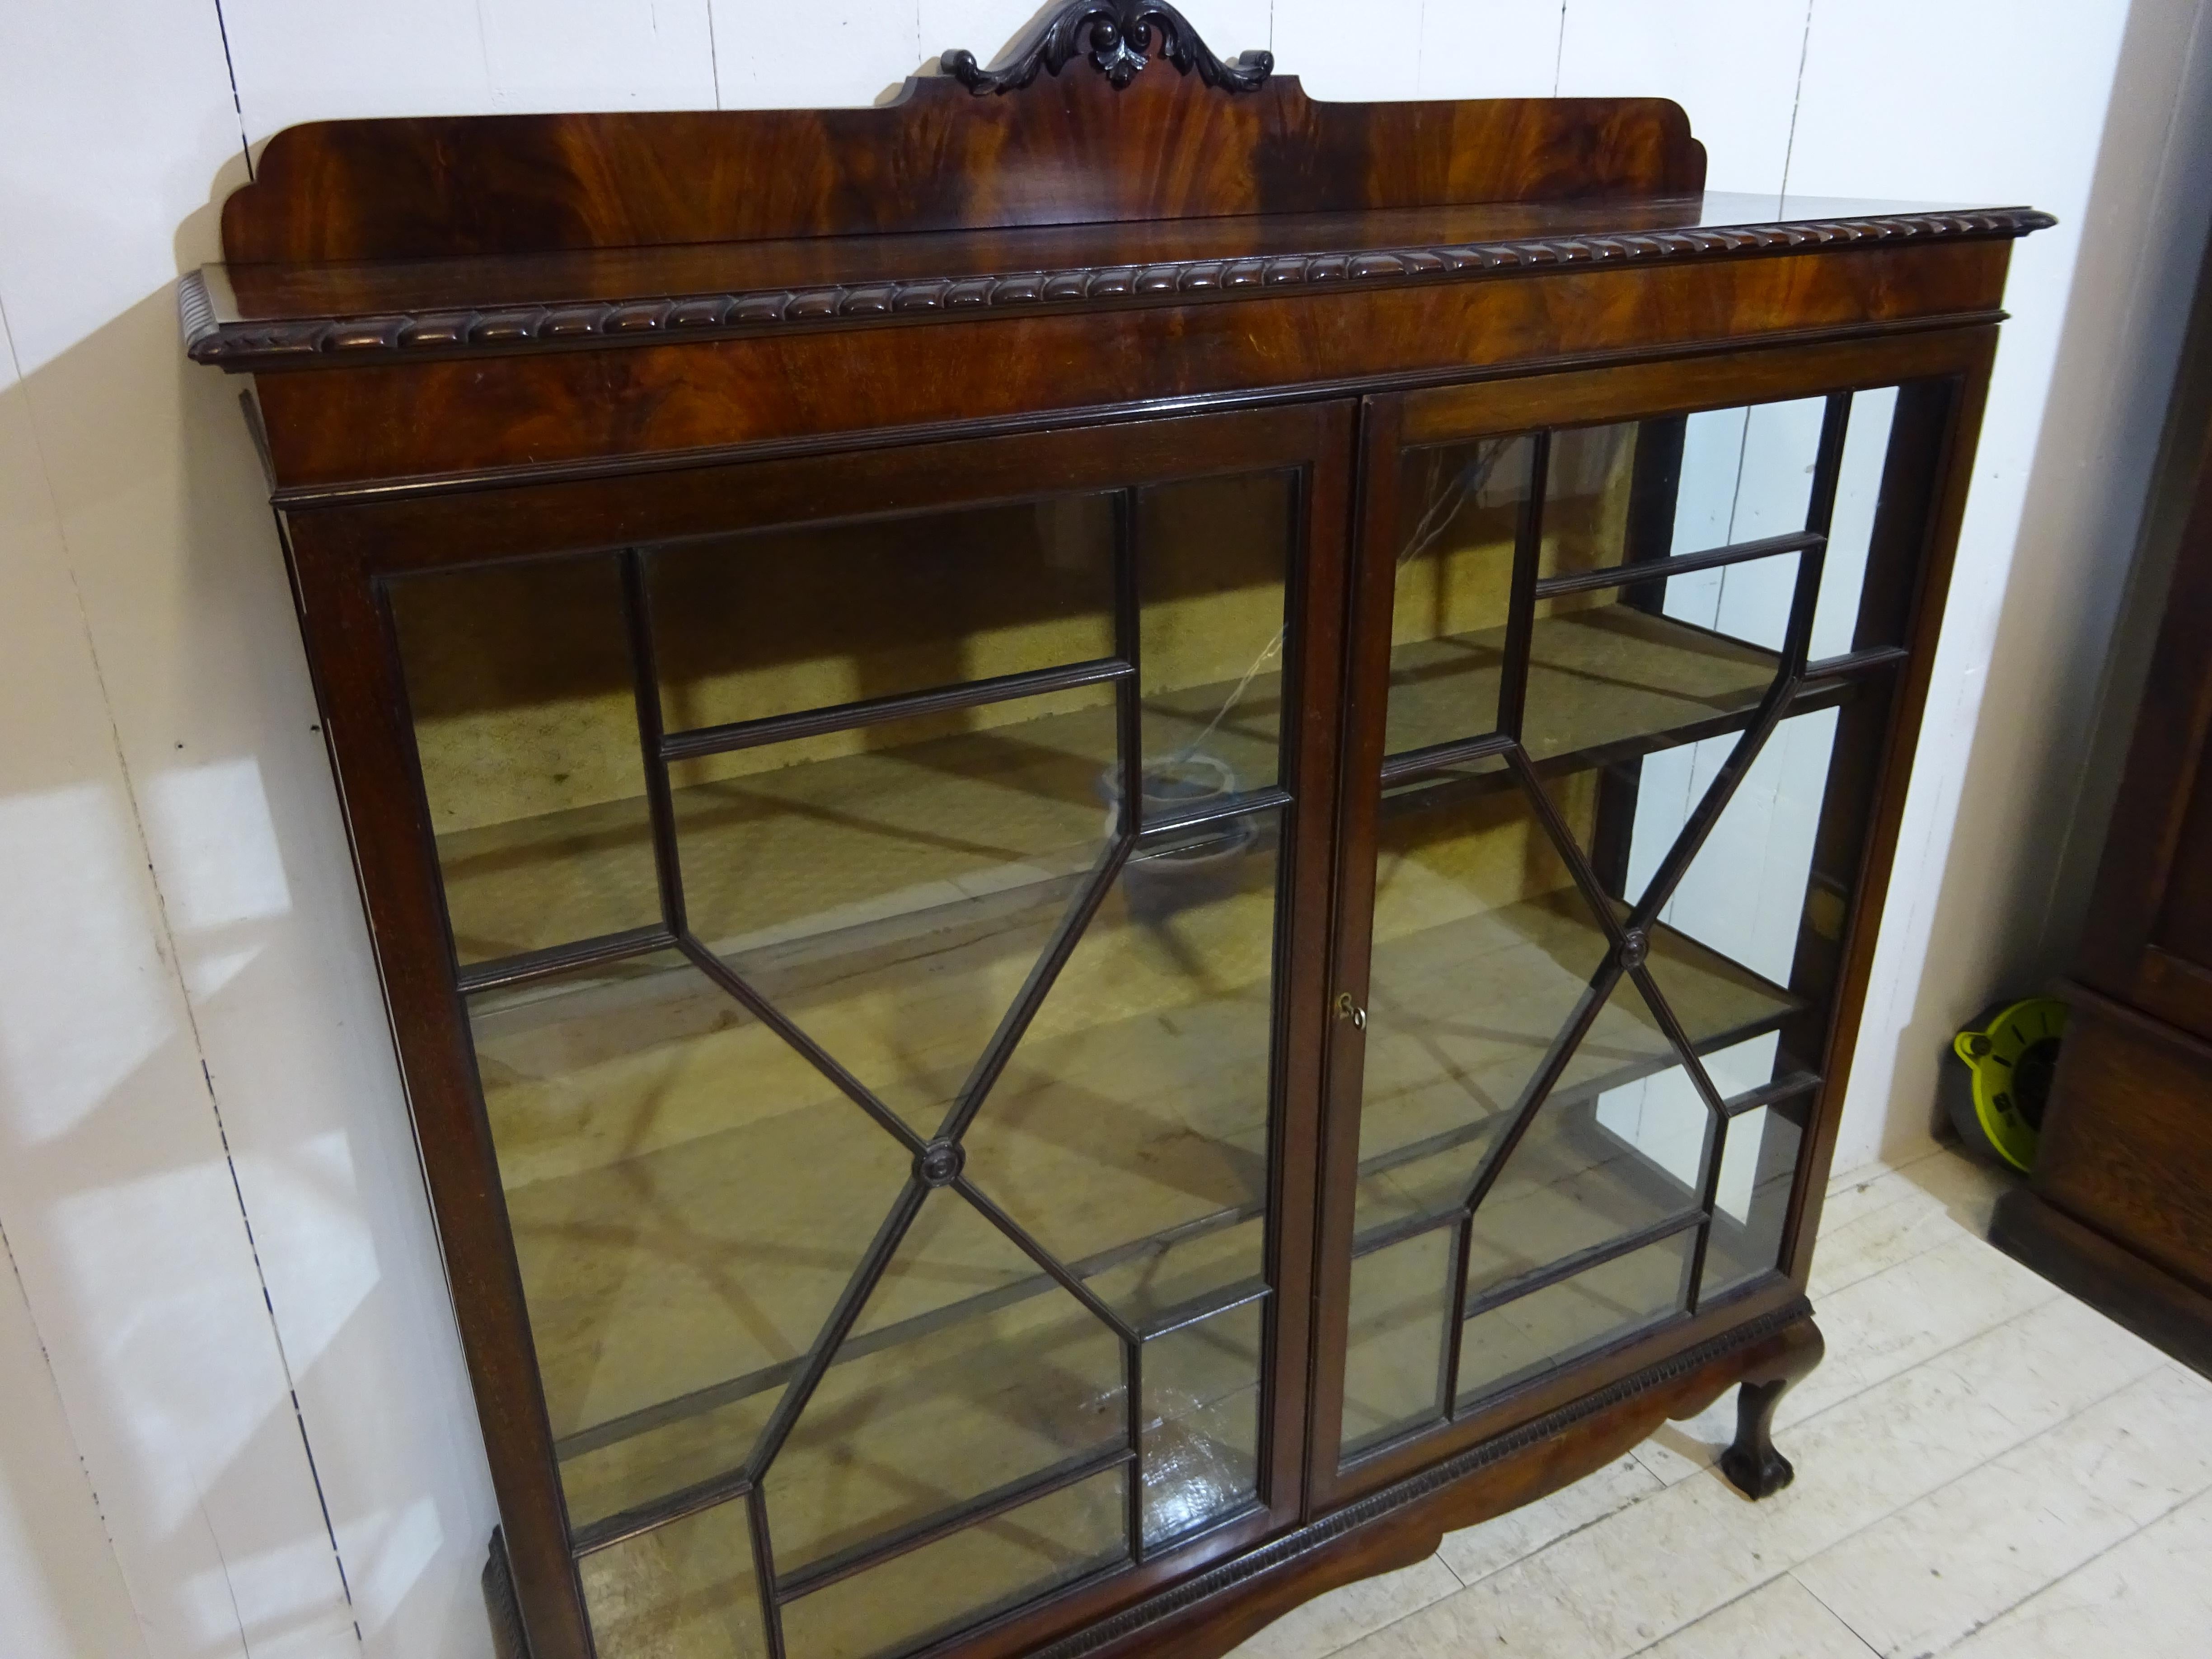 This is a stunning late Victorian display cabinet.

In lovely original condition the cabinet has been handcrafted throughout. The display cabinet sits on four hand carved ball and claw feet offering a stable and secure standing position. Above is